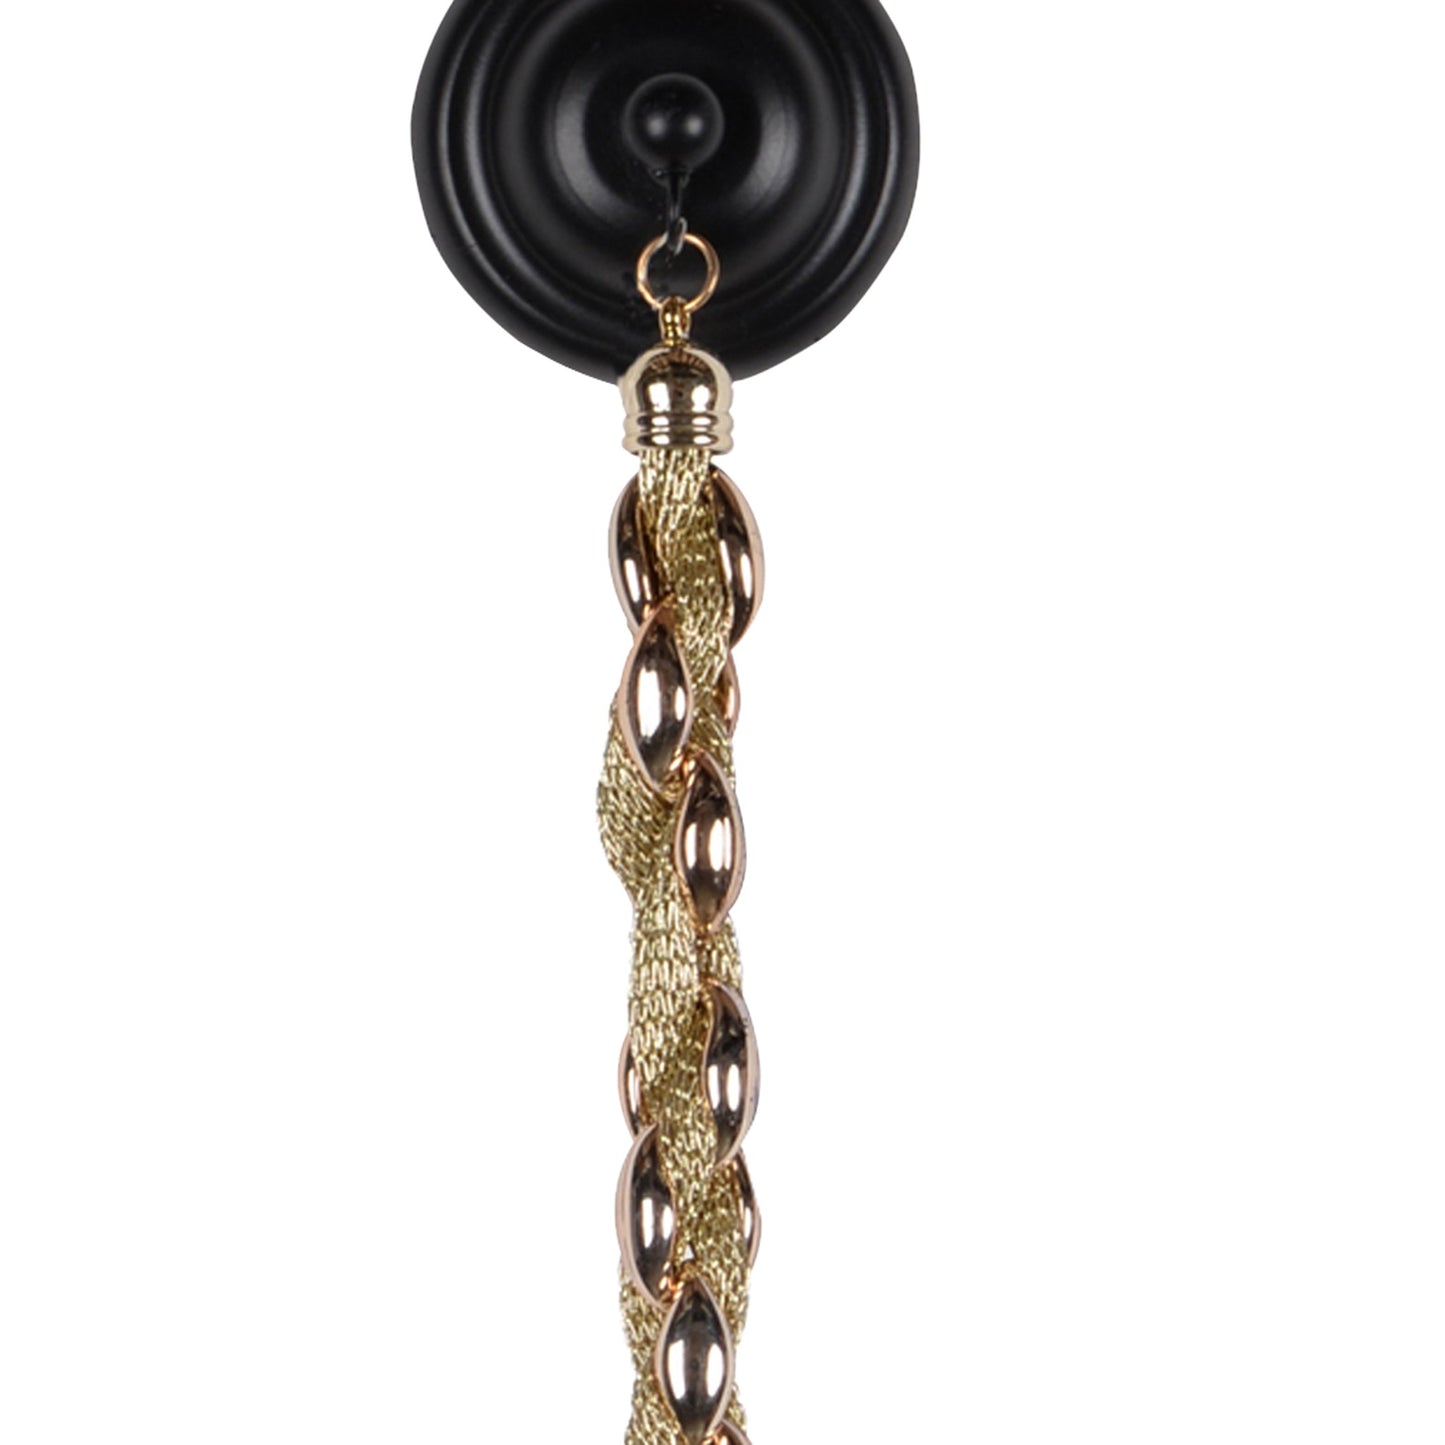 Benzara 30" Black and Gold Round Metal Wall Mirror With Chain Hanger